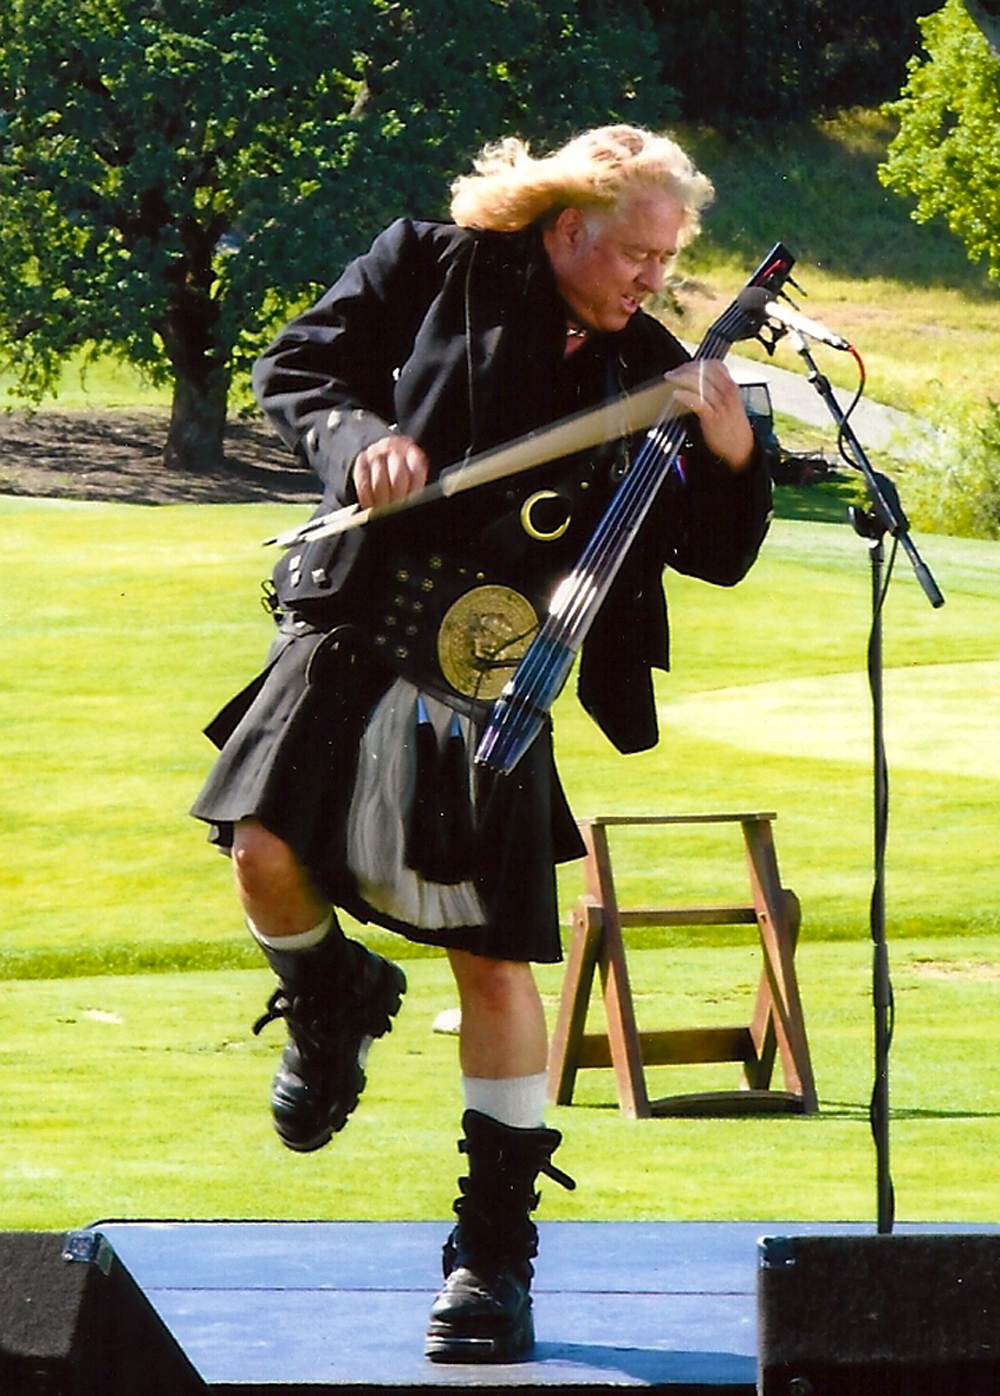 Marston performs at the Charles Shultz Celebrity Golf Classic